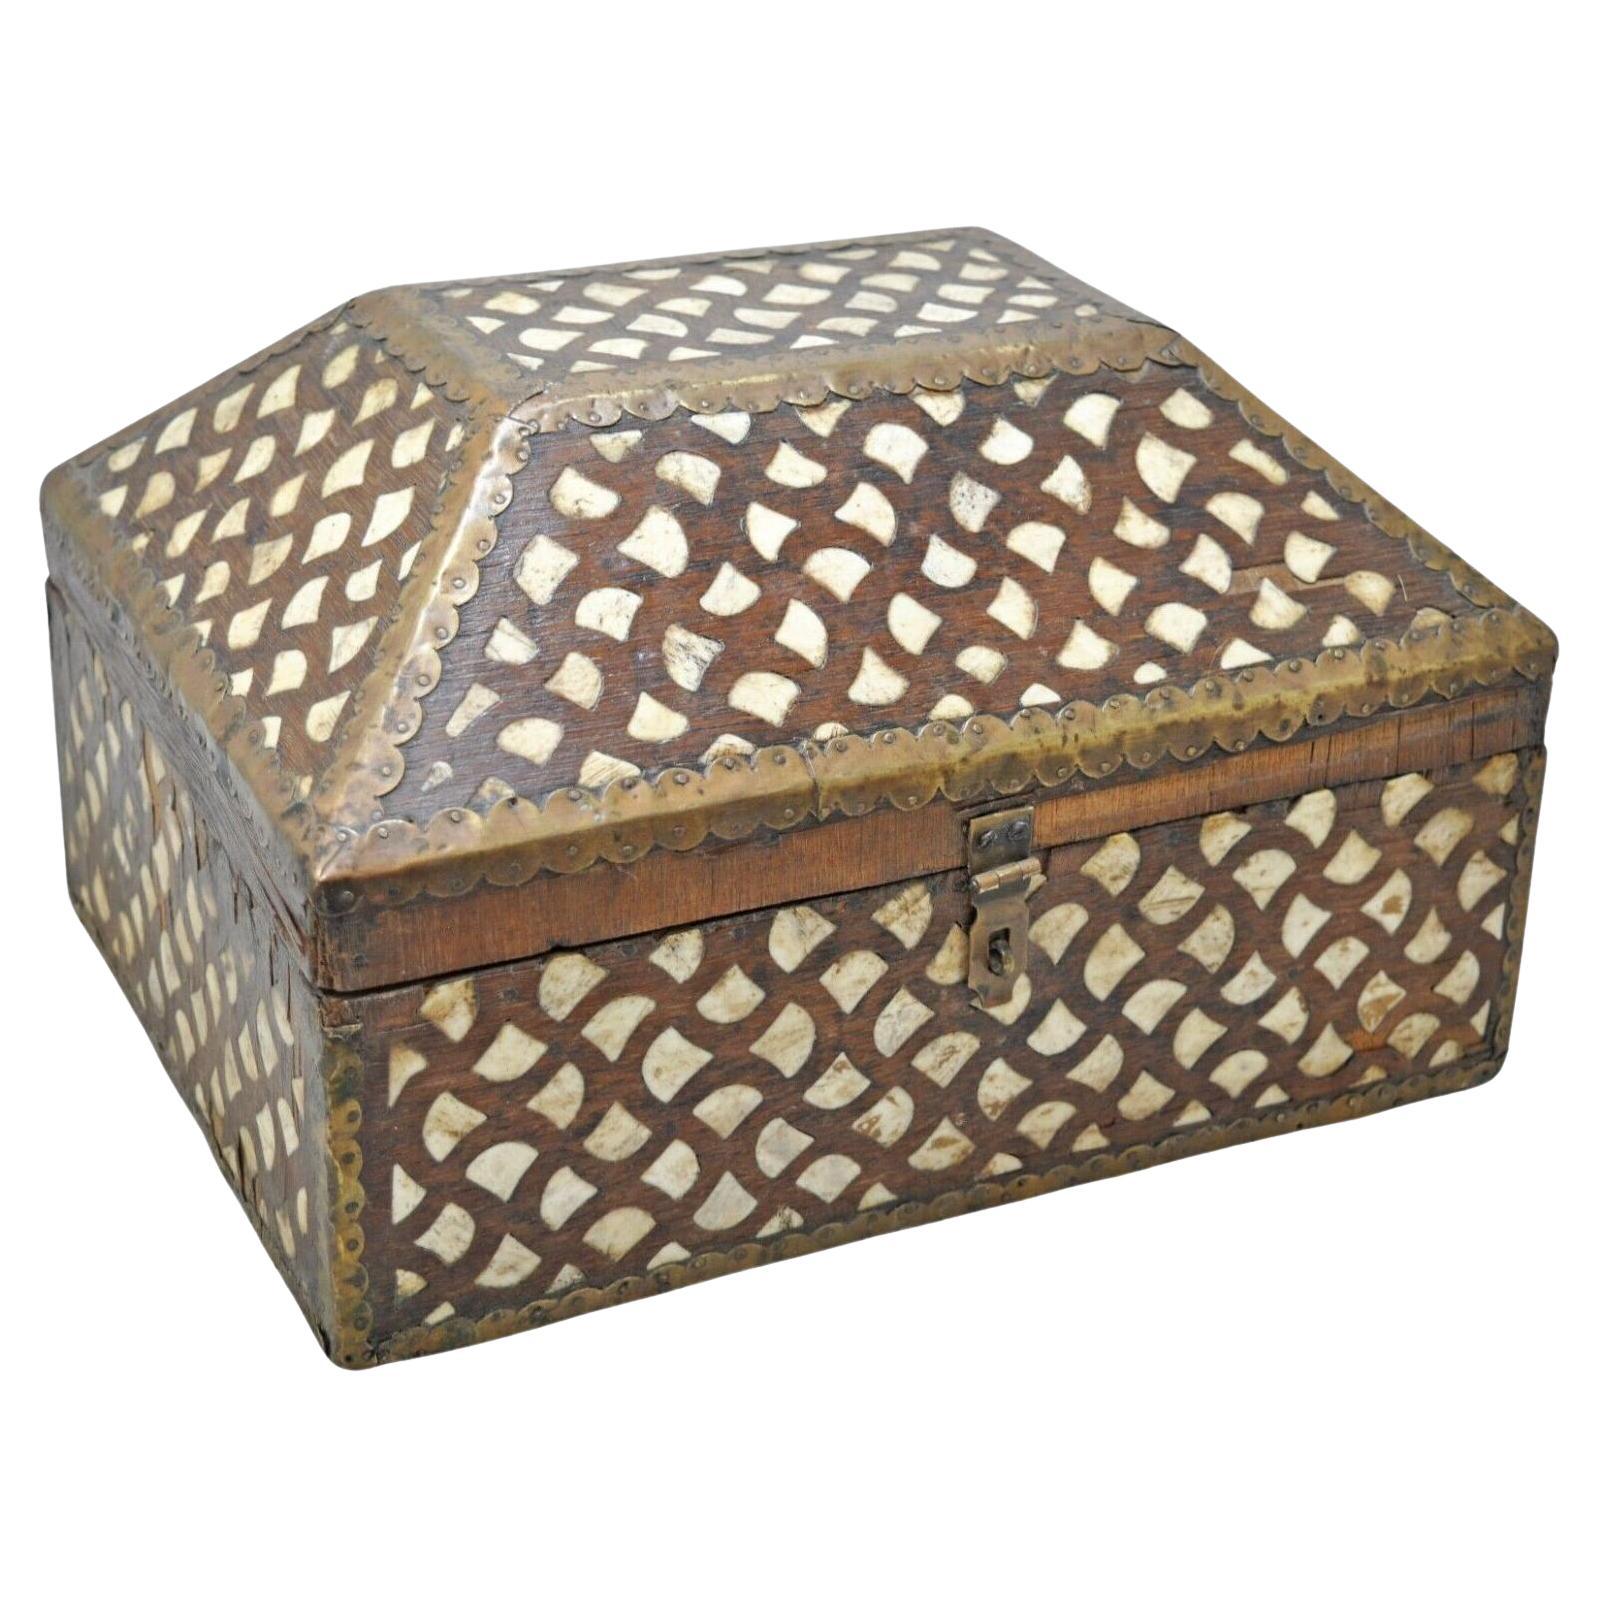 Antique Hand-Crafted Decorative Box with Distinctive Bone Inlay Pattern  For Sale